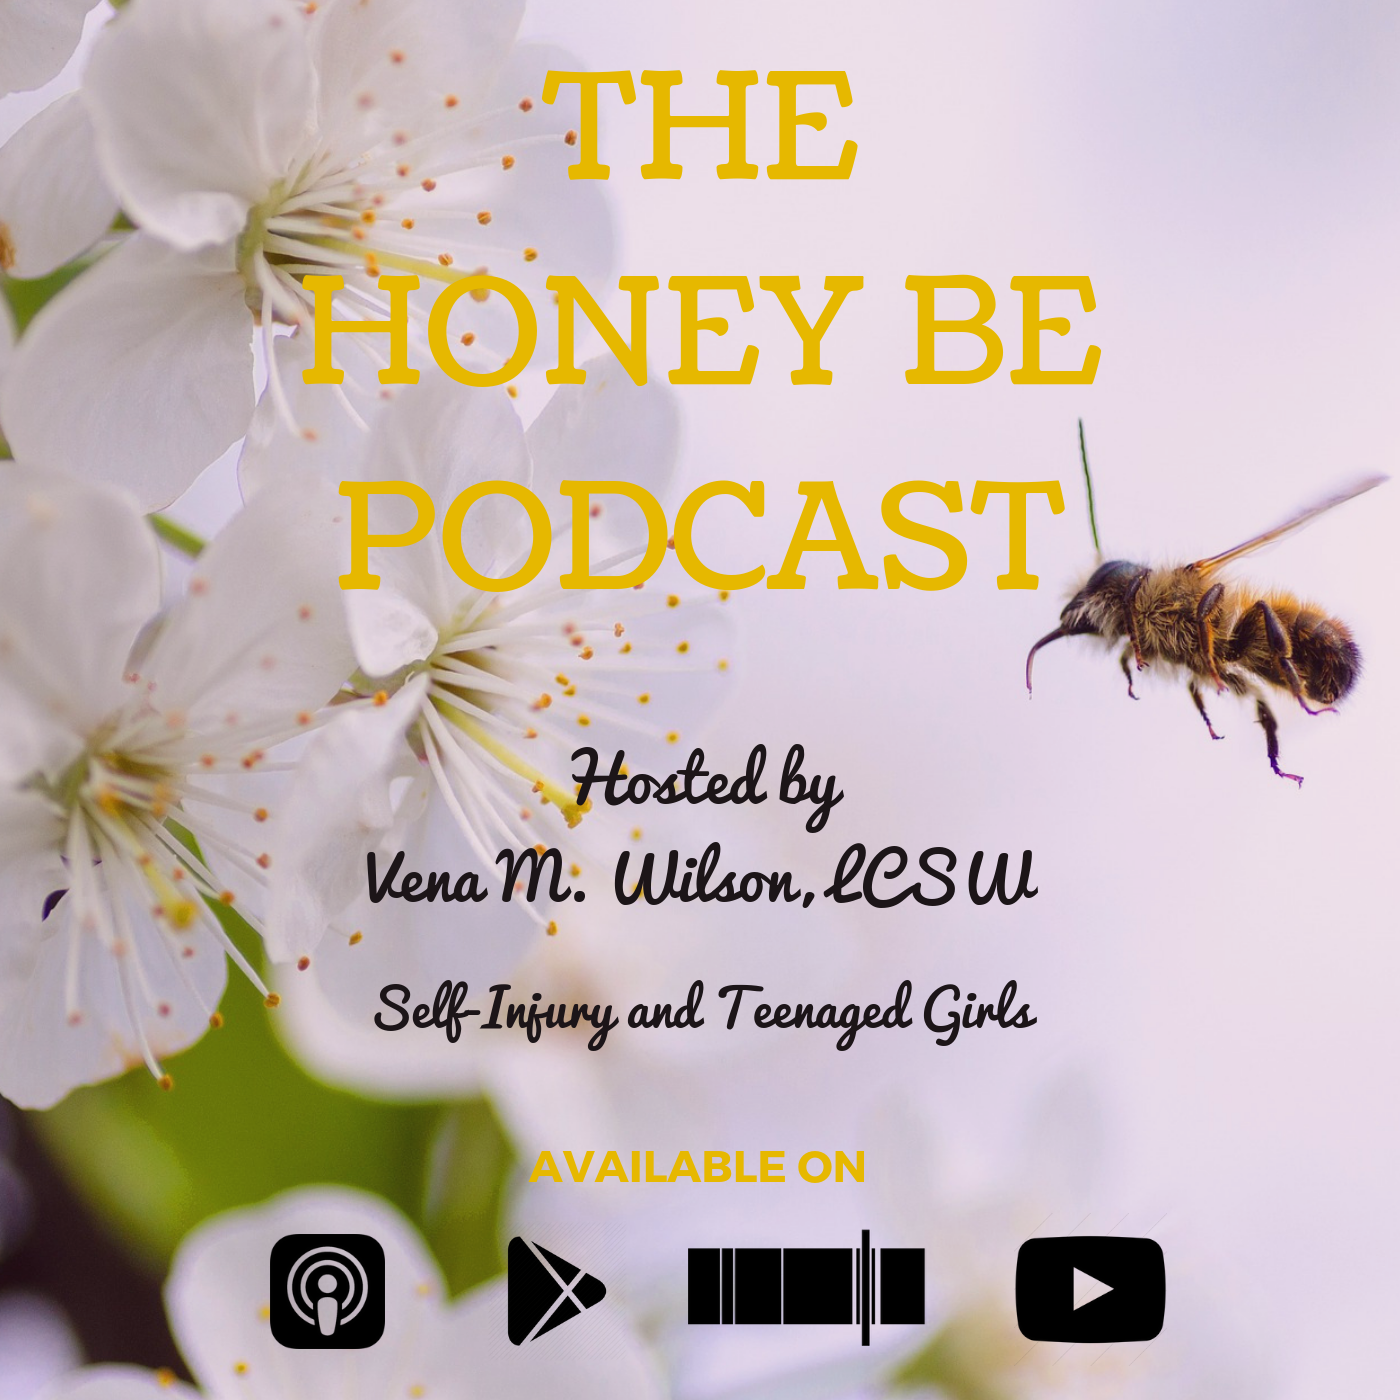 The Honey Be Podcast – Episode 034: “Self-Injury and Teenaged Girls”